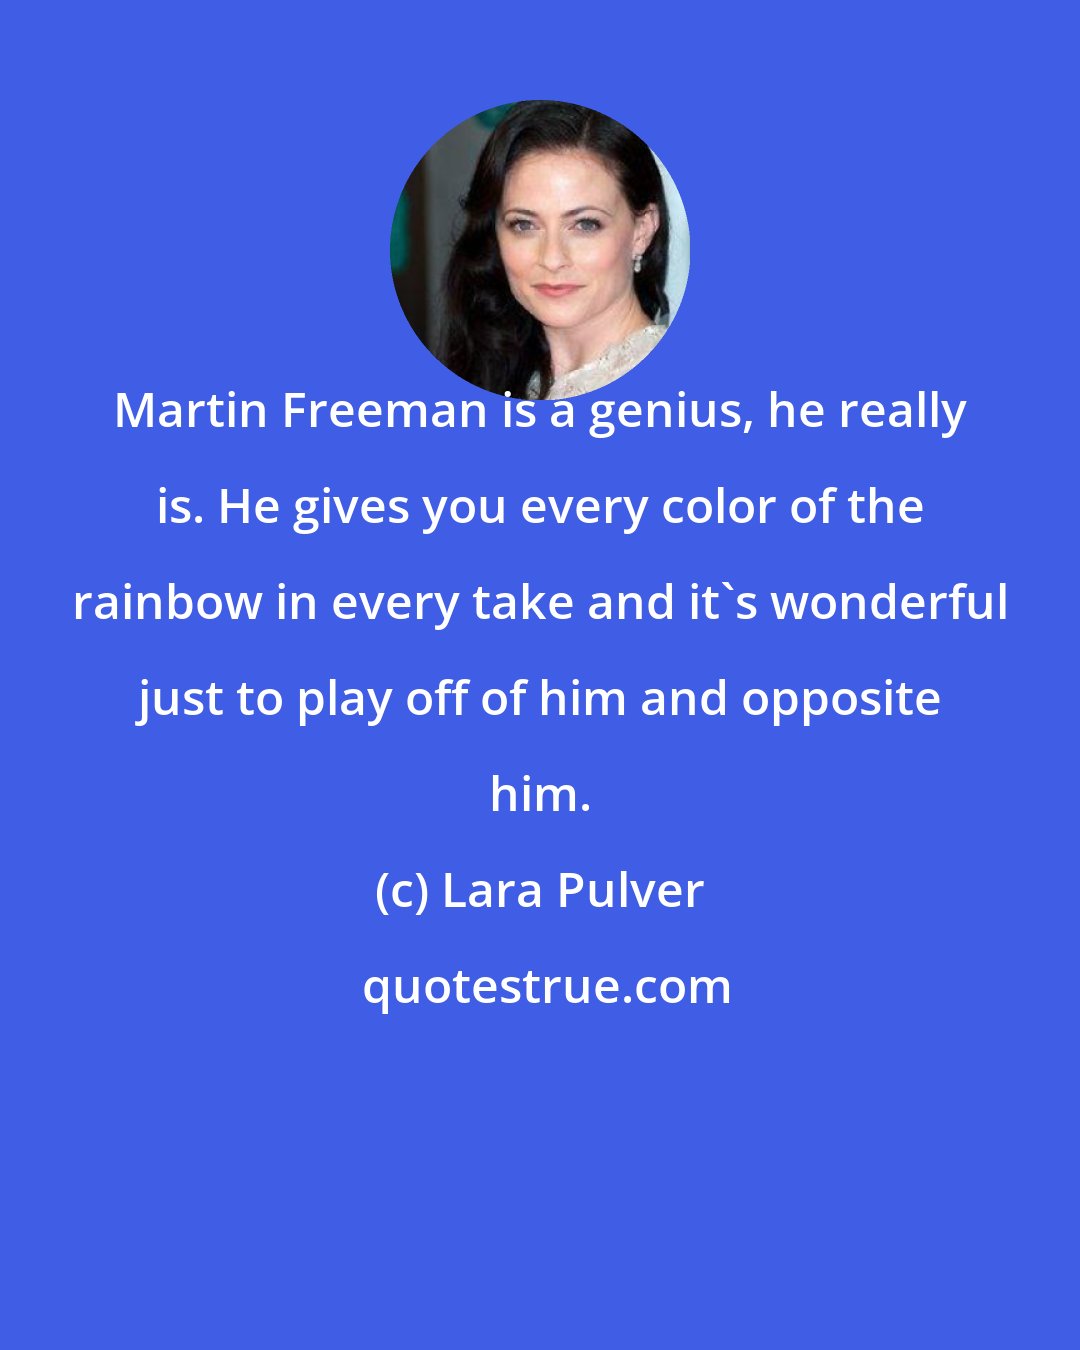 Lara Pulver: Martin Freeman is a genius, he really is. He gives you every color of the rainbow in every take and it's wonderful just to play off of him and opposite him.